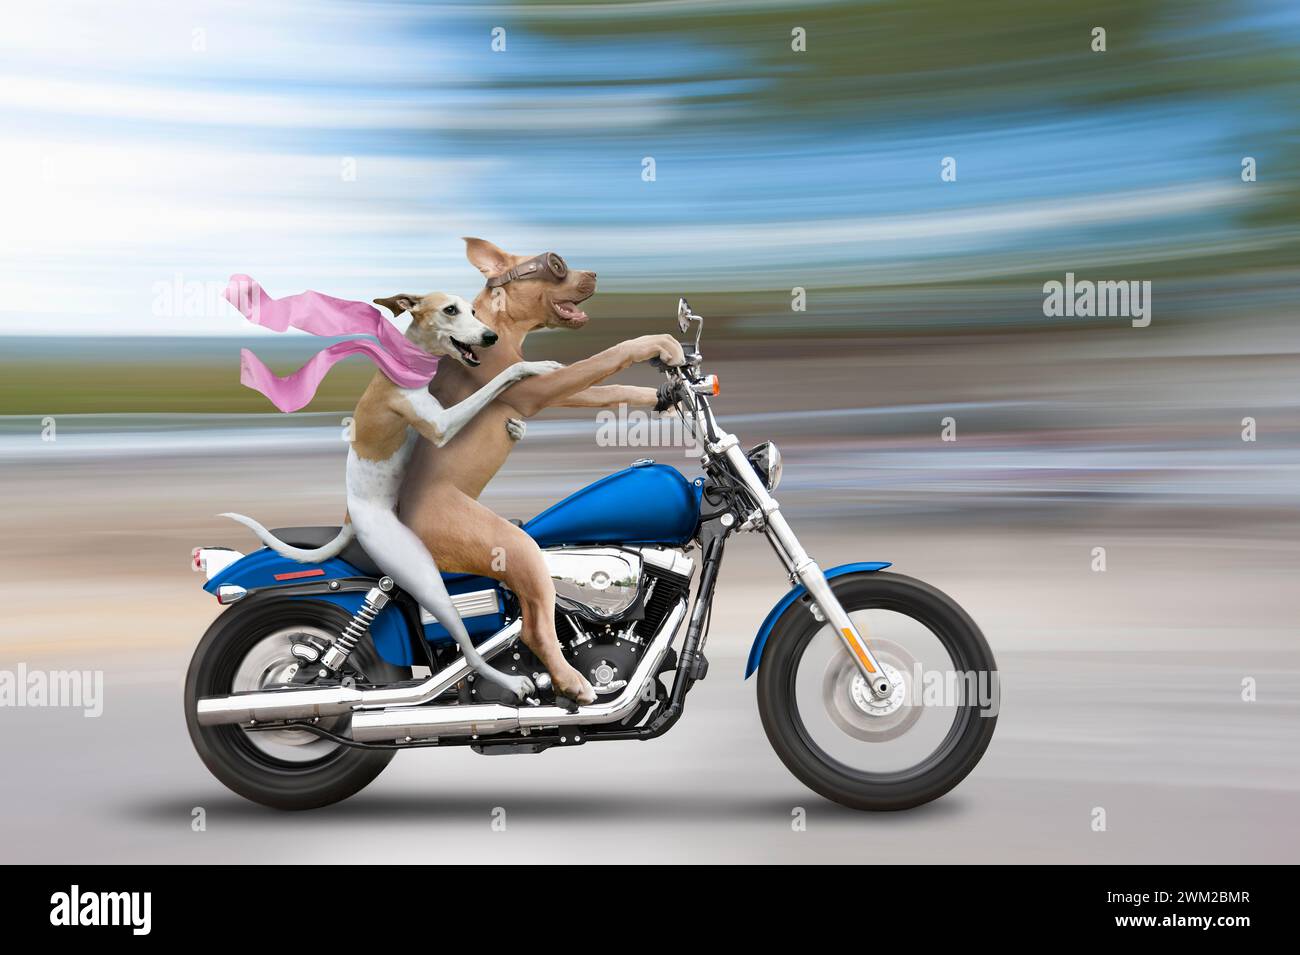 Freedom and joy are two of the concepts illustrated by this funny image of two dogs, a pit bull and a whippet, riding a Harley Davidson motorcycle. Stock Photo